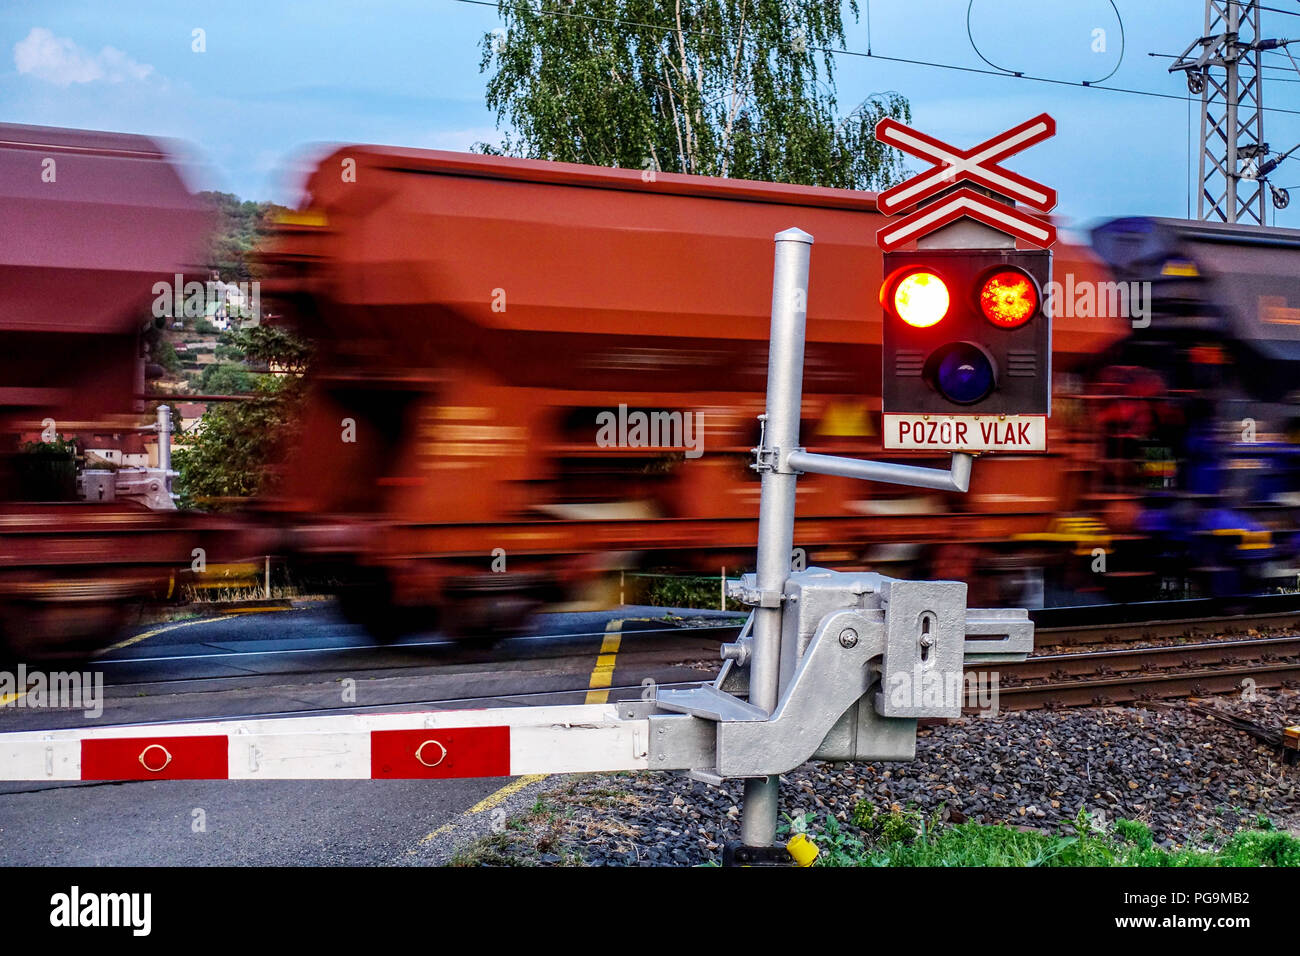 Cargo train passing a railroad crossing with red traffic lights flashing, Czech Republic, Europe Stock Photo